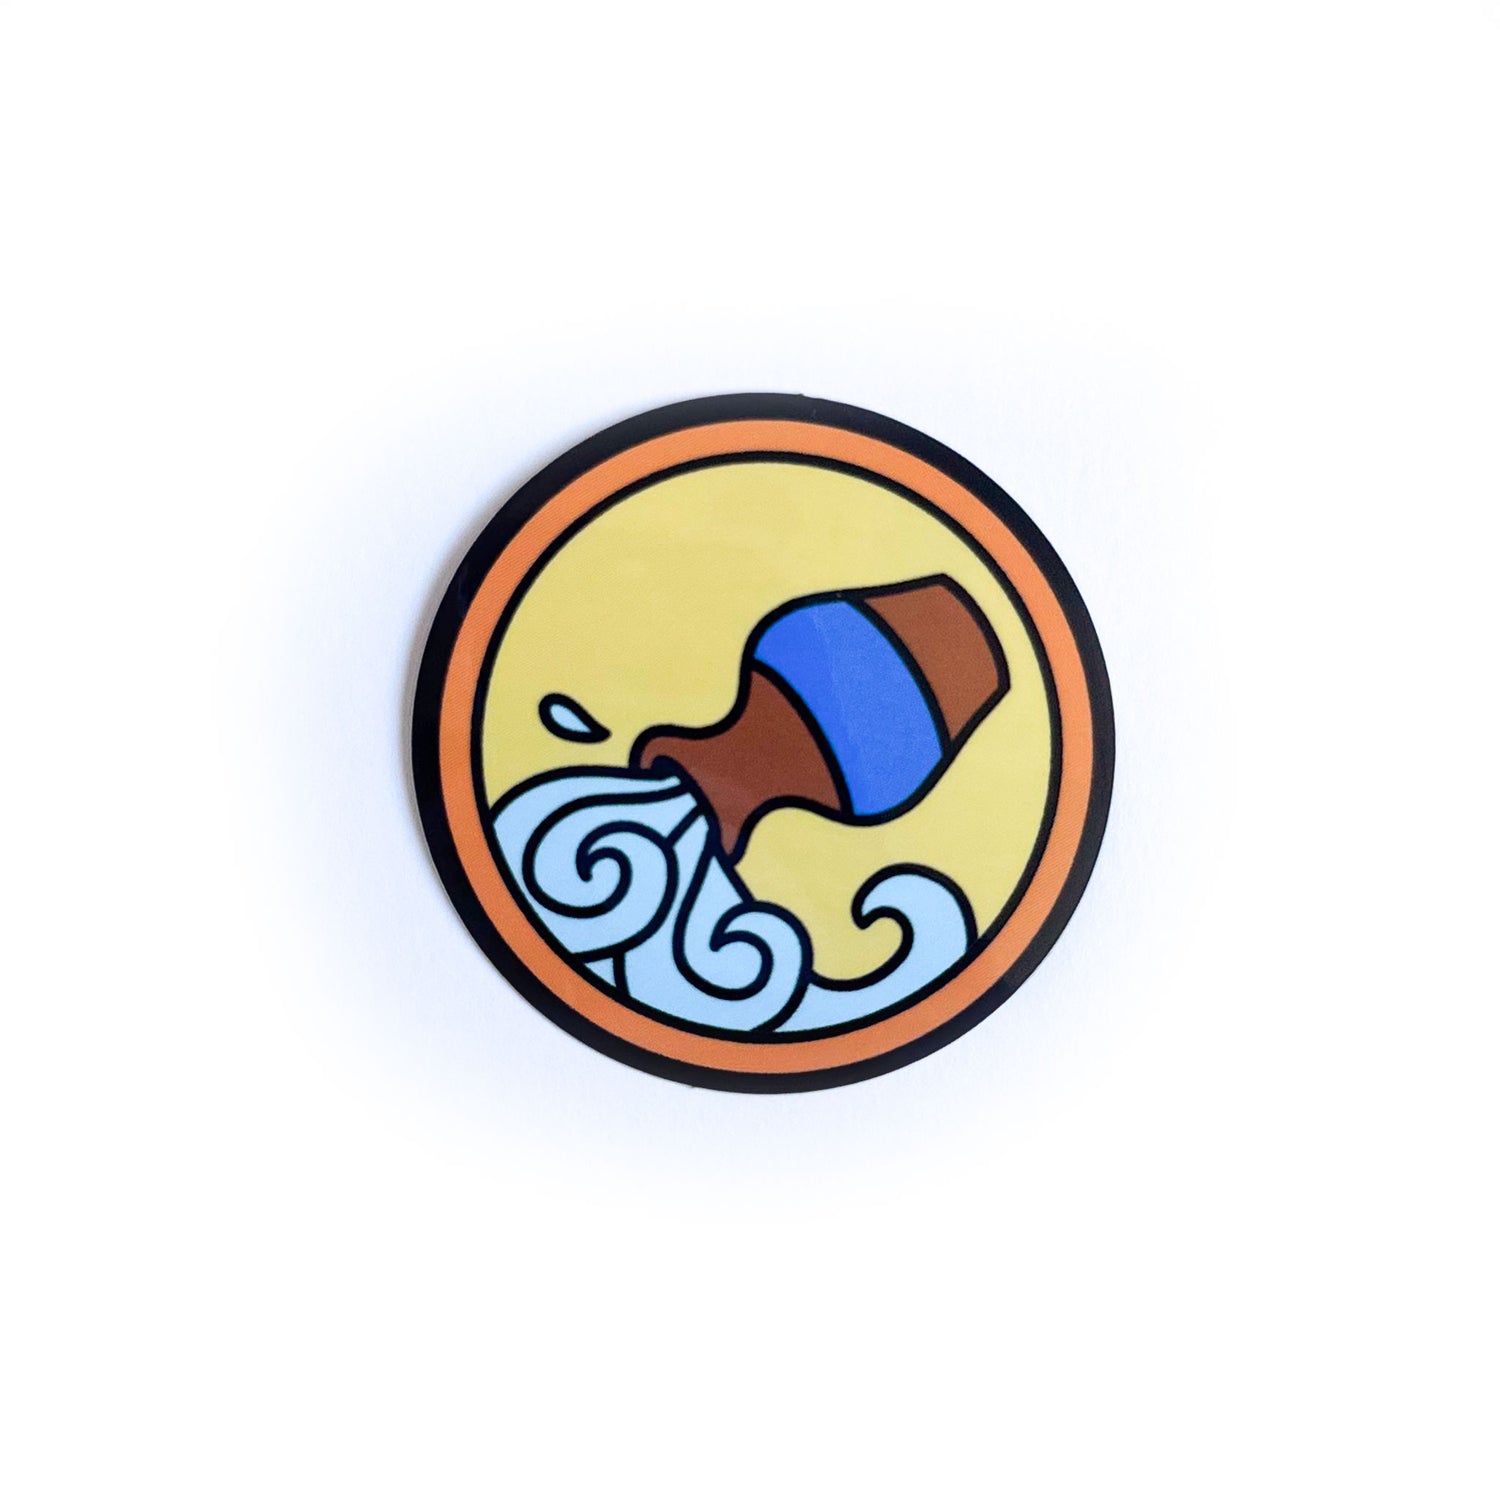 A circular vinyl sticker with the Aquarius zodiac symbol in a cute style on it. The symbol is a water vessel pouring water from it on a yellow background with an outer circle in orange.